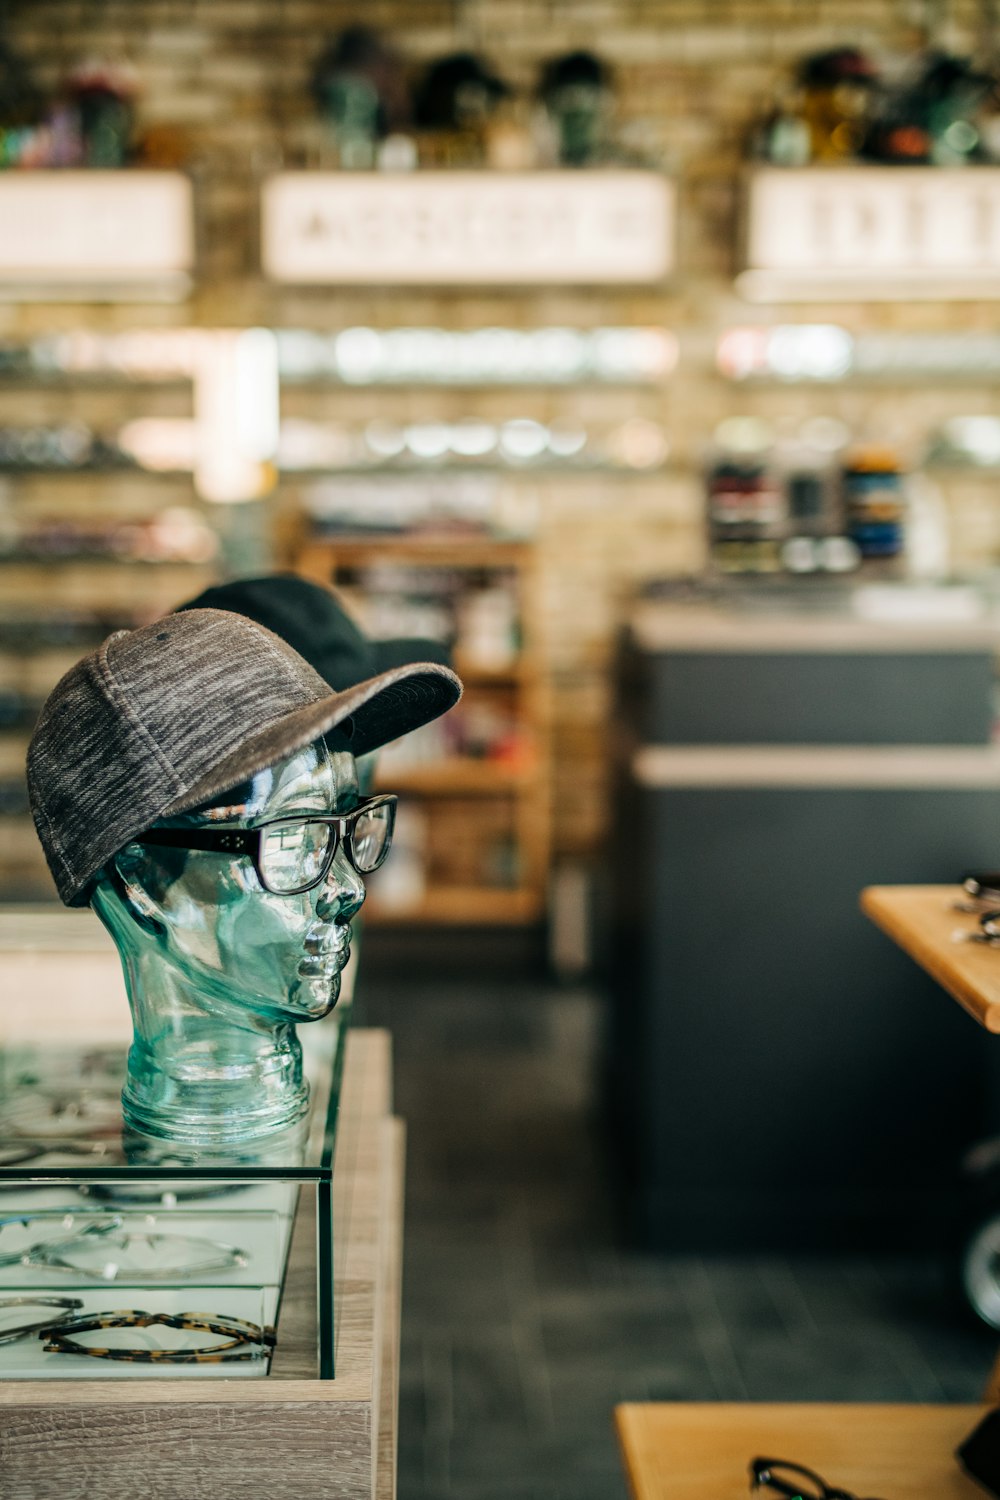 a hat and glasses on display in a store